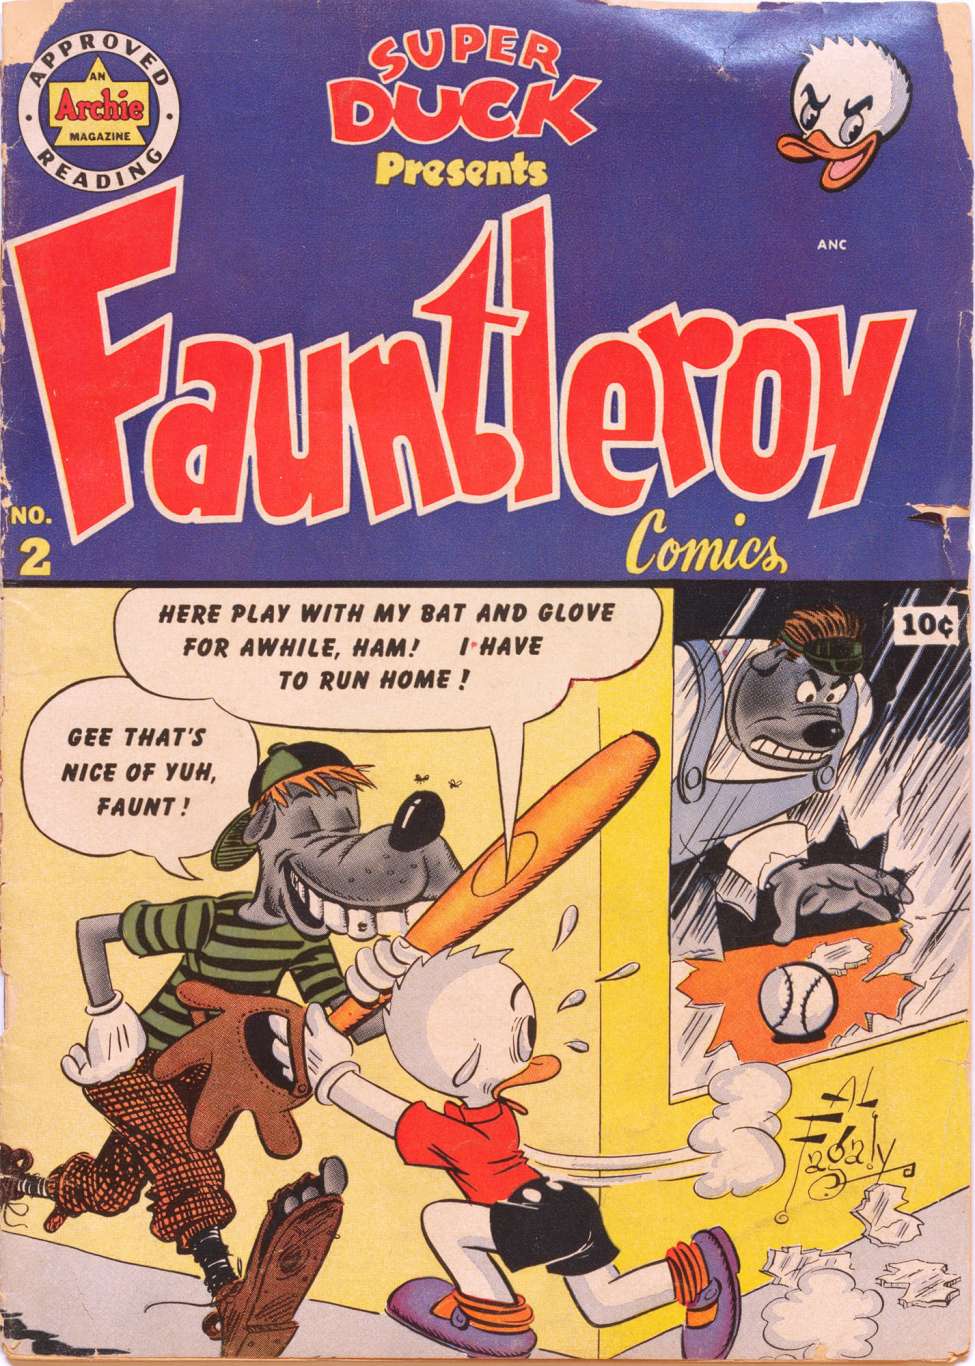 Book Cover For Fauntleroy Comics 2 - Version 2